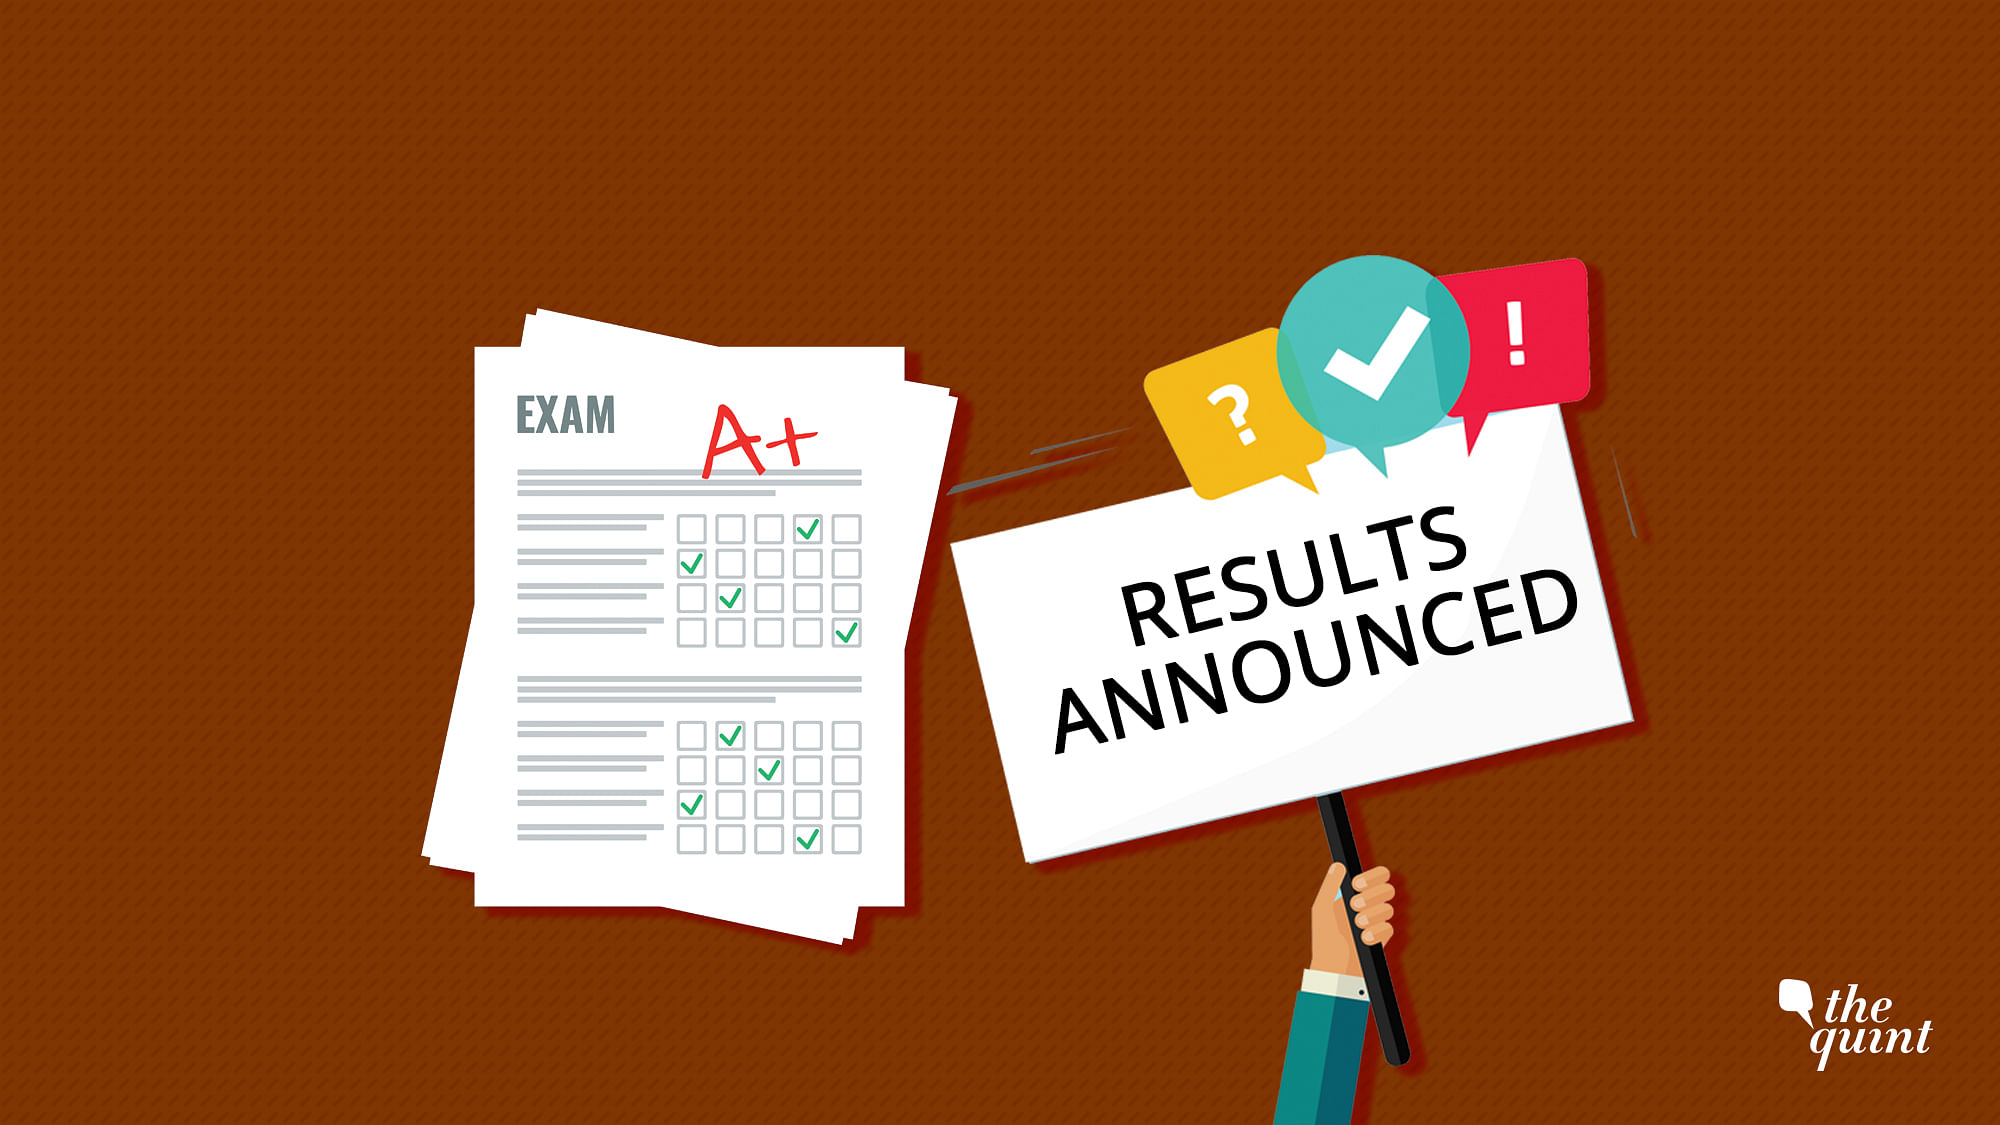 BSEB 12th  Result 2021: Bihar board Class 12 board exam result can be checked on the official website. Image used for representation purpose.